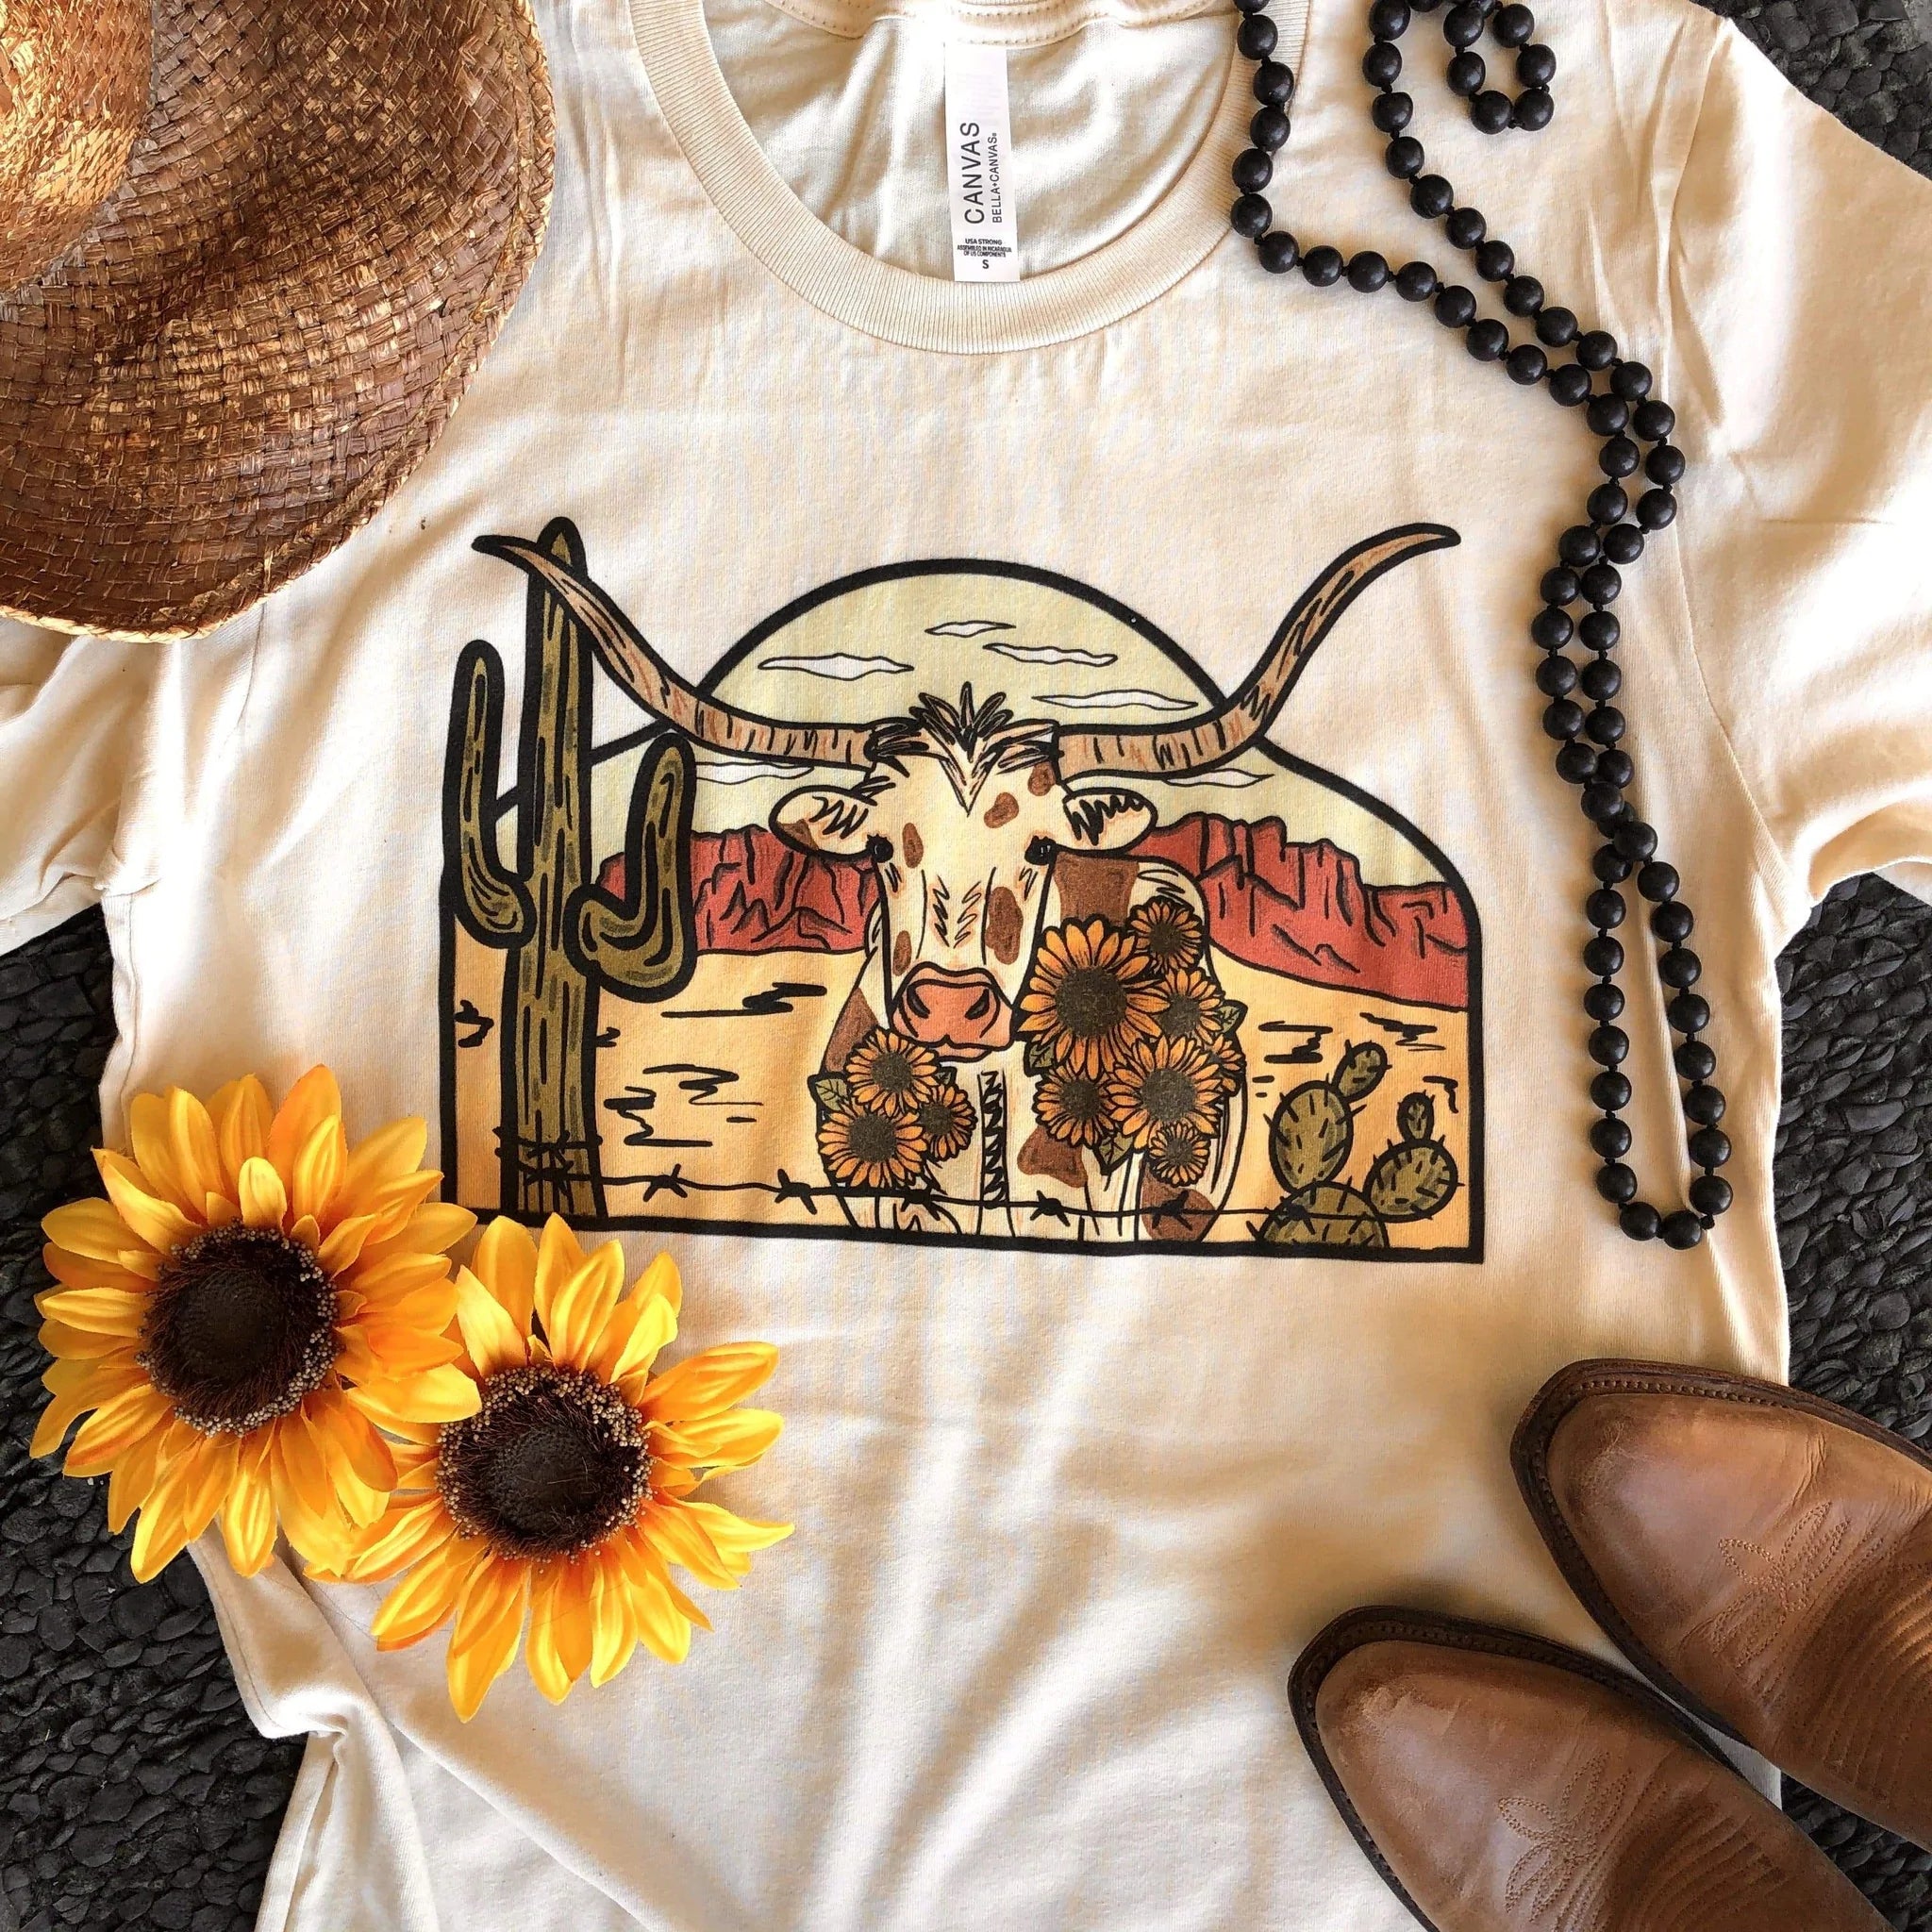 This cream Bella + Canvas graphic tee includes a crew neckline, short sleeves, and cute hand drawn design of a desert scene with a longhorn in the middle. This tee is shown in this photo to be styled as a flat lay with a light brown straw hat, black beaded necklace, and light brown boots. 